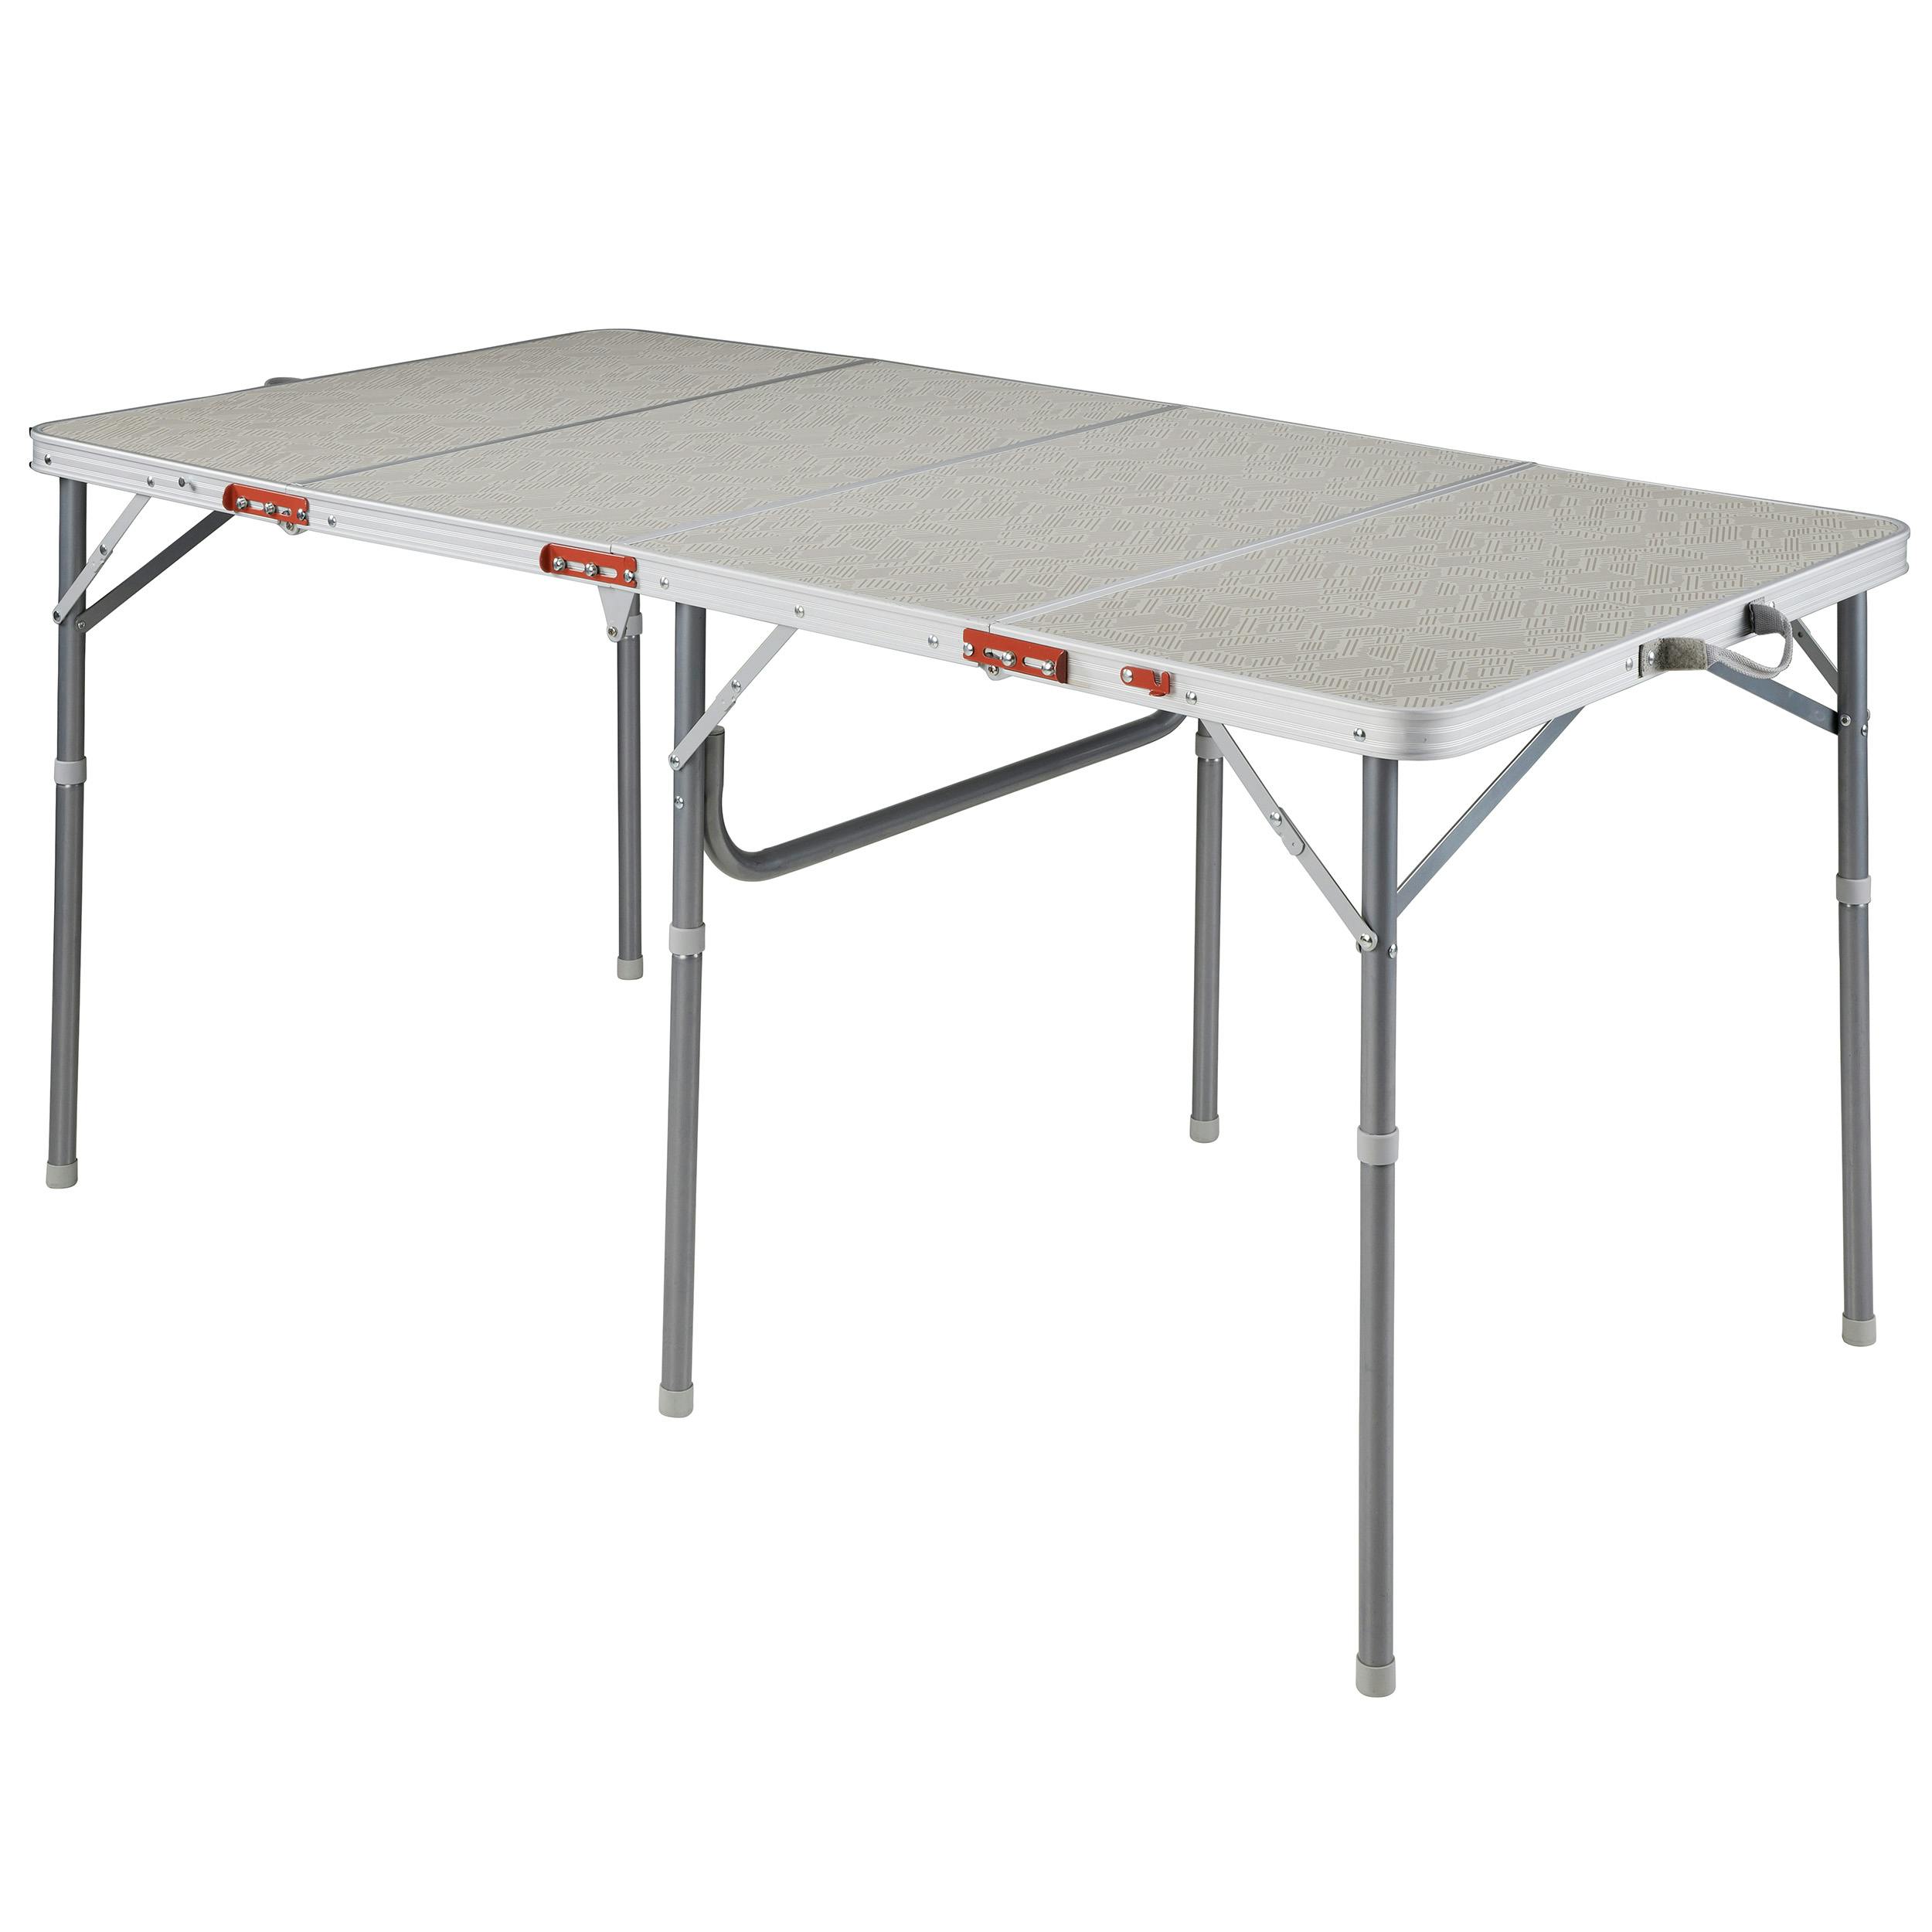 Decathlon 6/8 Person Camping Table